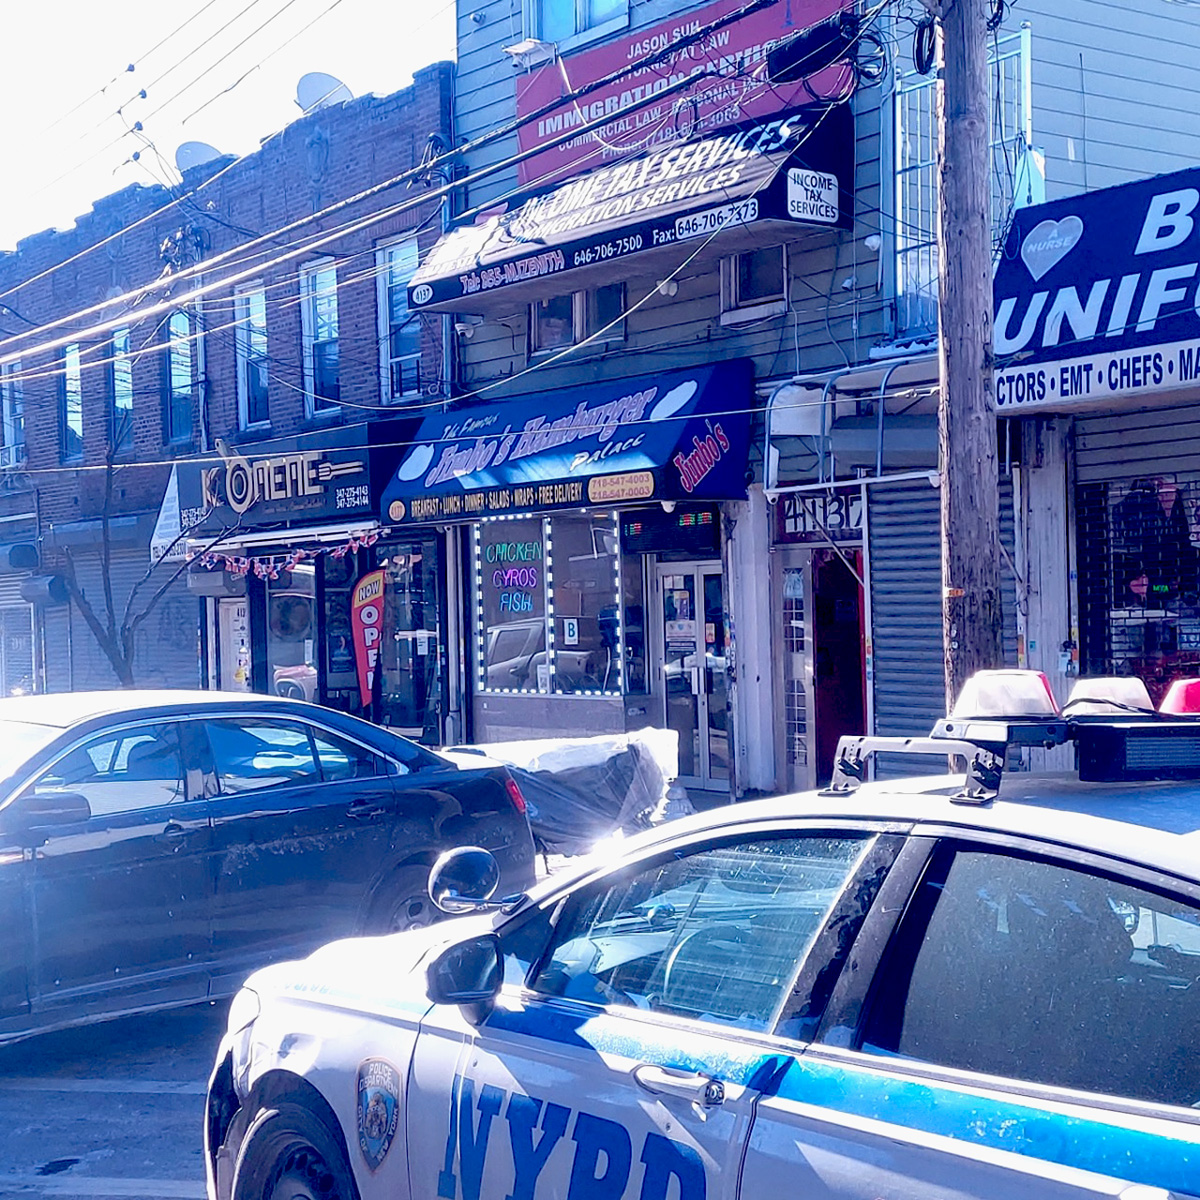 Four people were shot, 1 died during a quadruple shooting in the Bronx. -Photo by David Greene